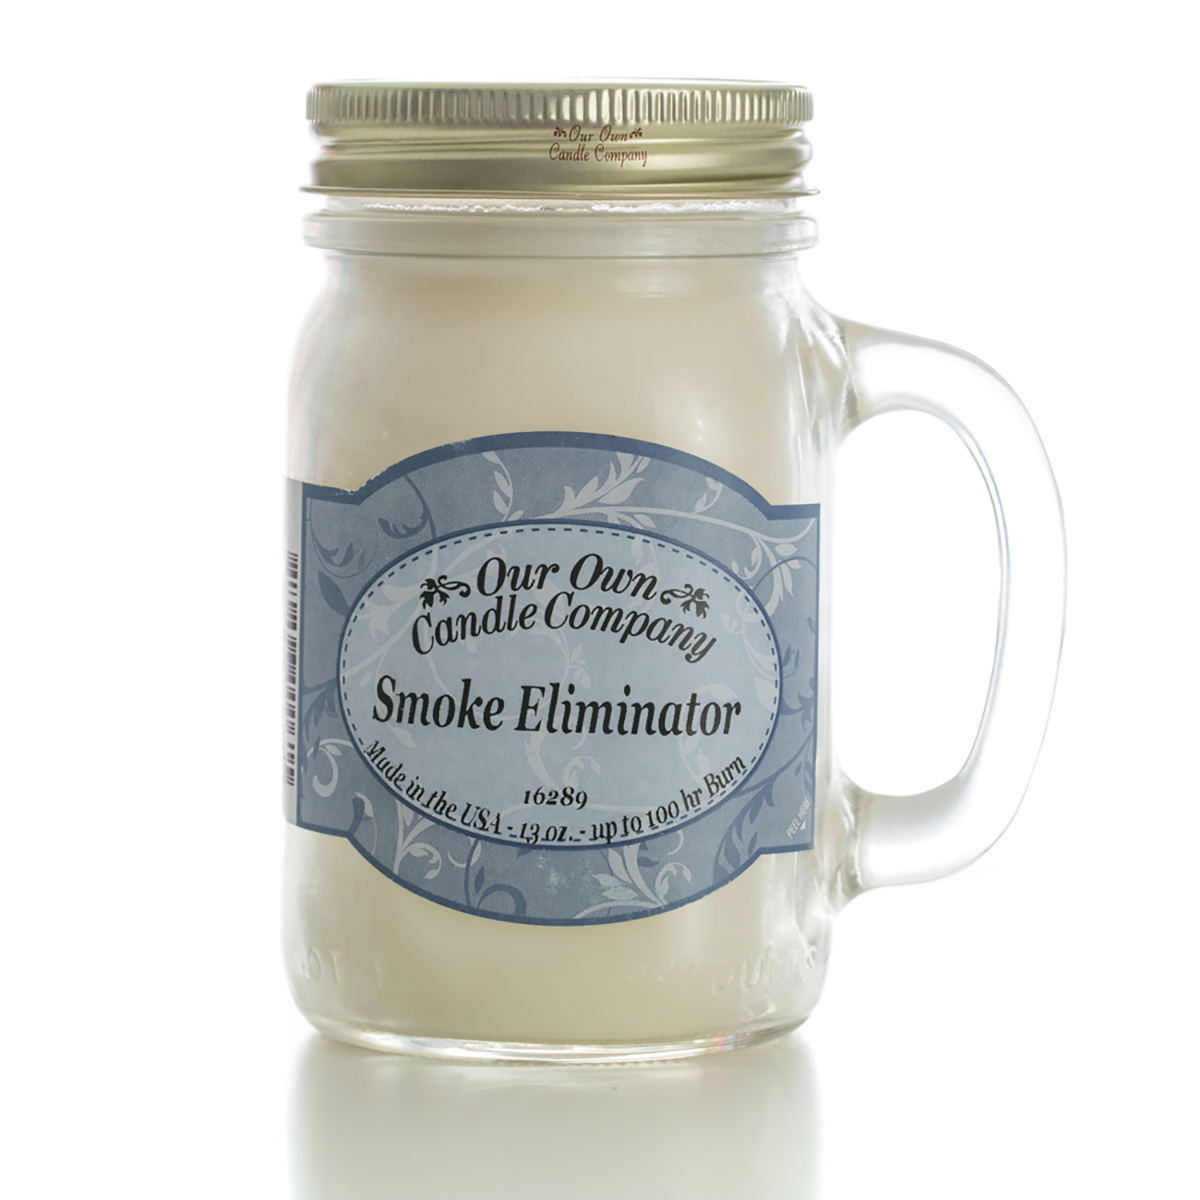 Our Own Candle Company 13oz. Smoke Eliminator Jar Candle